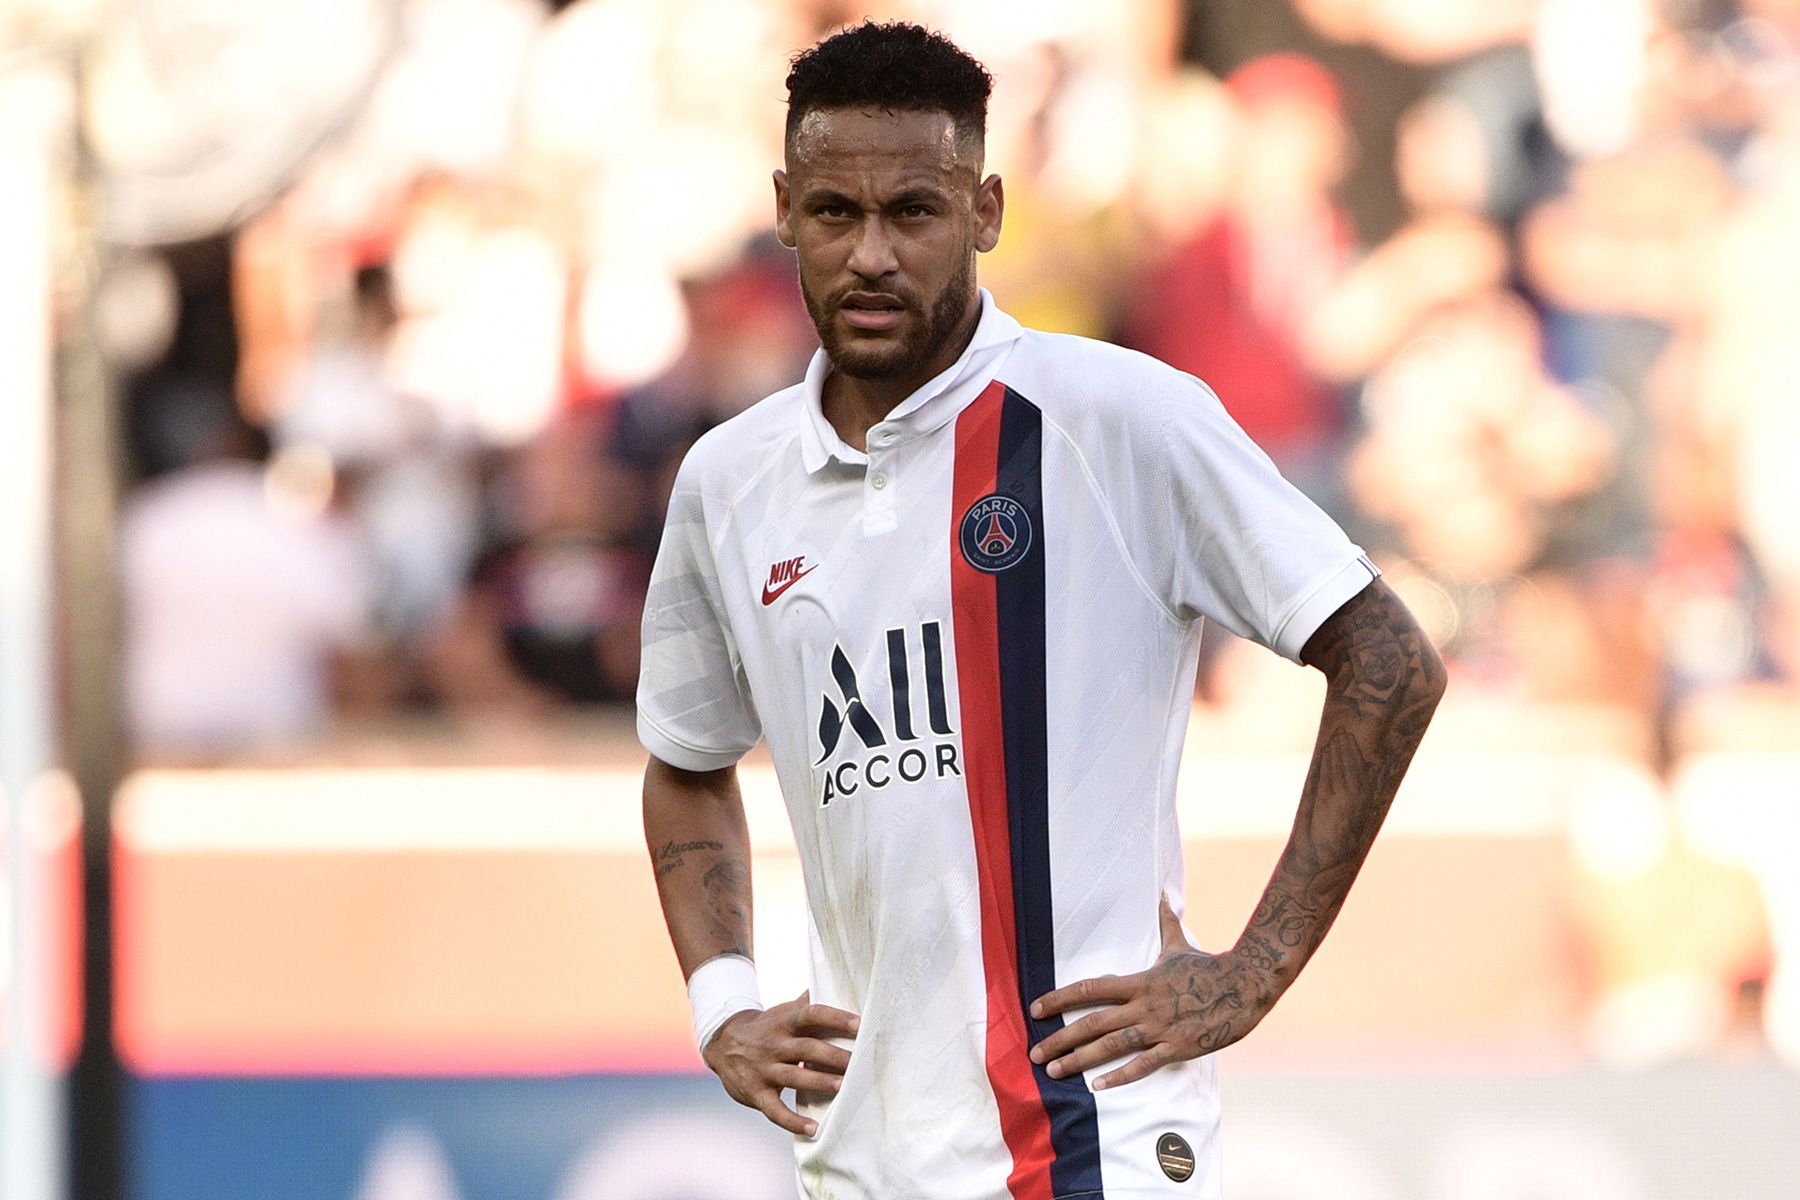 Neymar Jr In his debut with the PSG this season